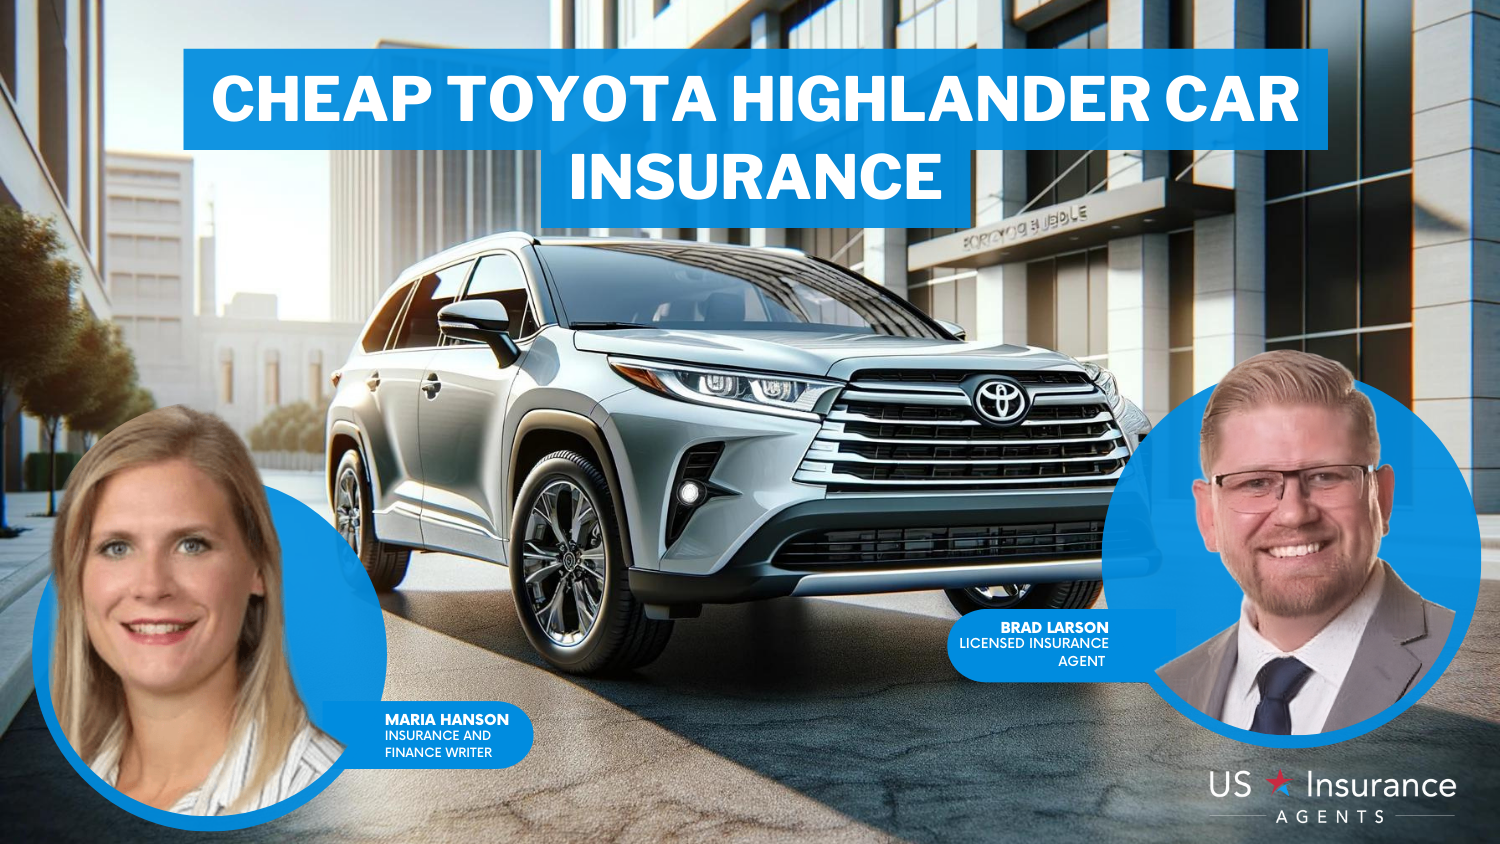 Cheap Toyota Highlander Car Insurance: The General, Erie, and USAA